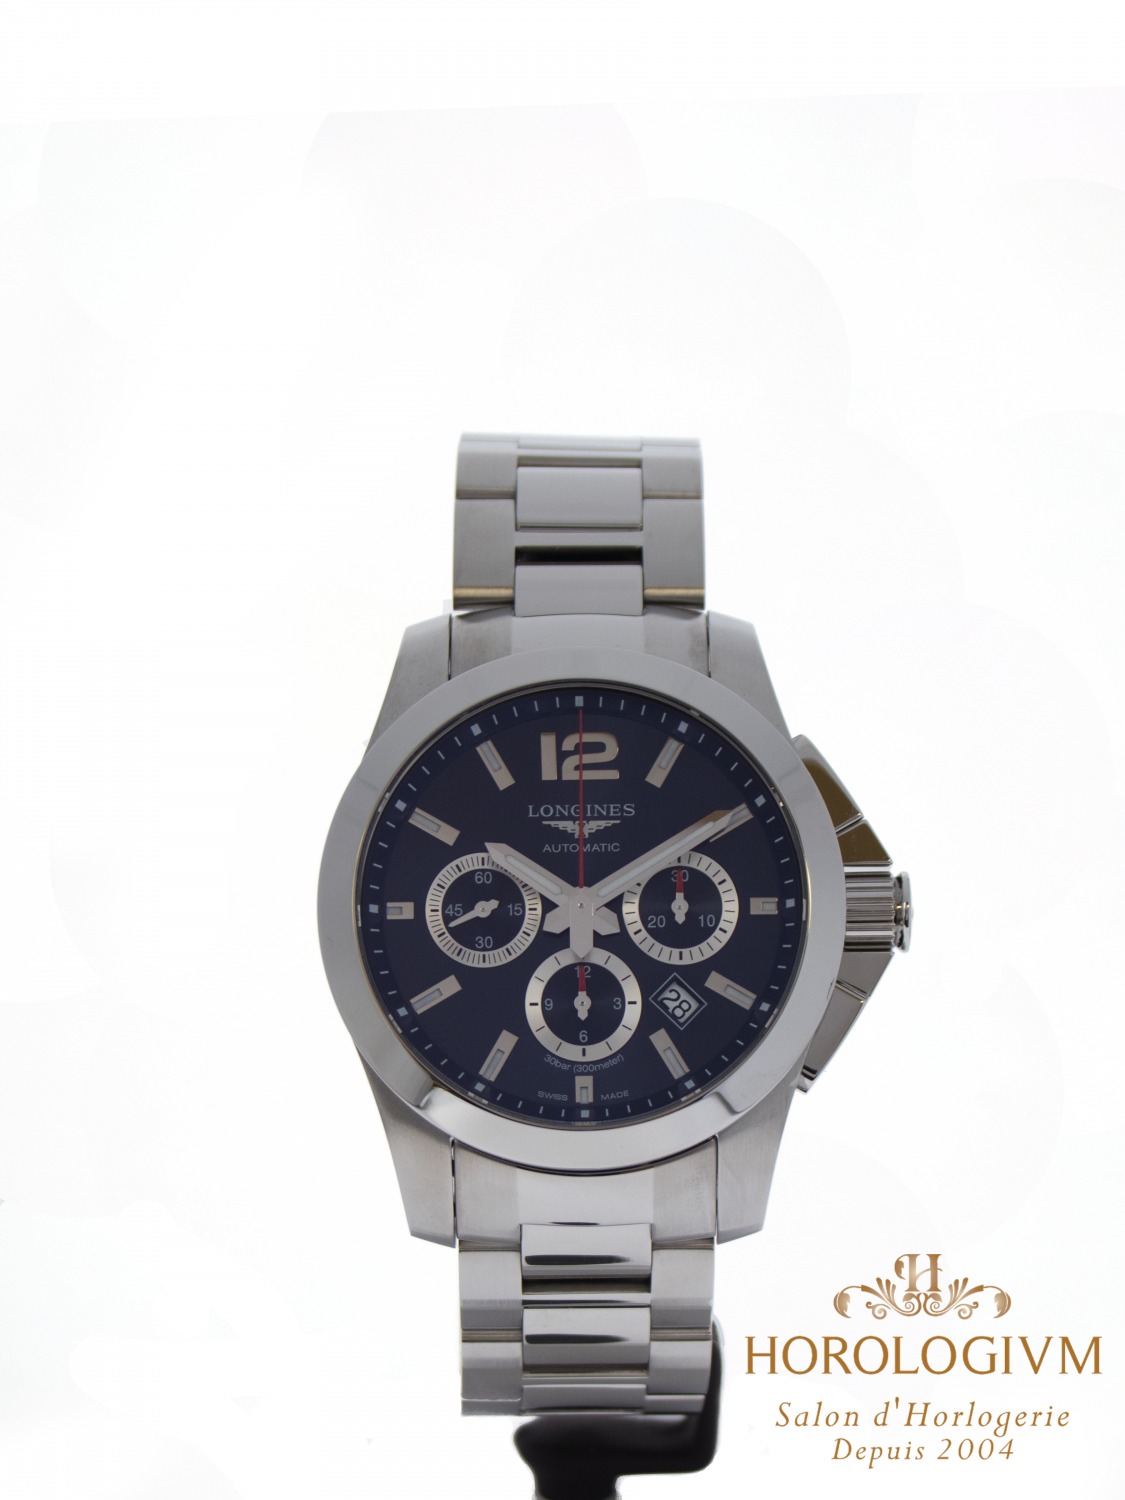 Longines Conquest Chronograph 44MM Ref. L3.801.4.96.6 Blue Dial watch, silver